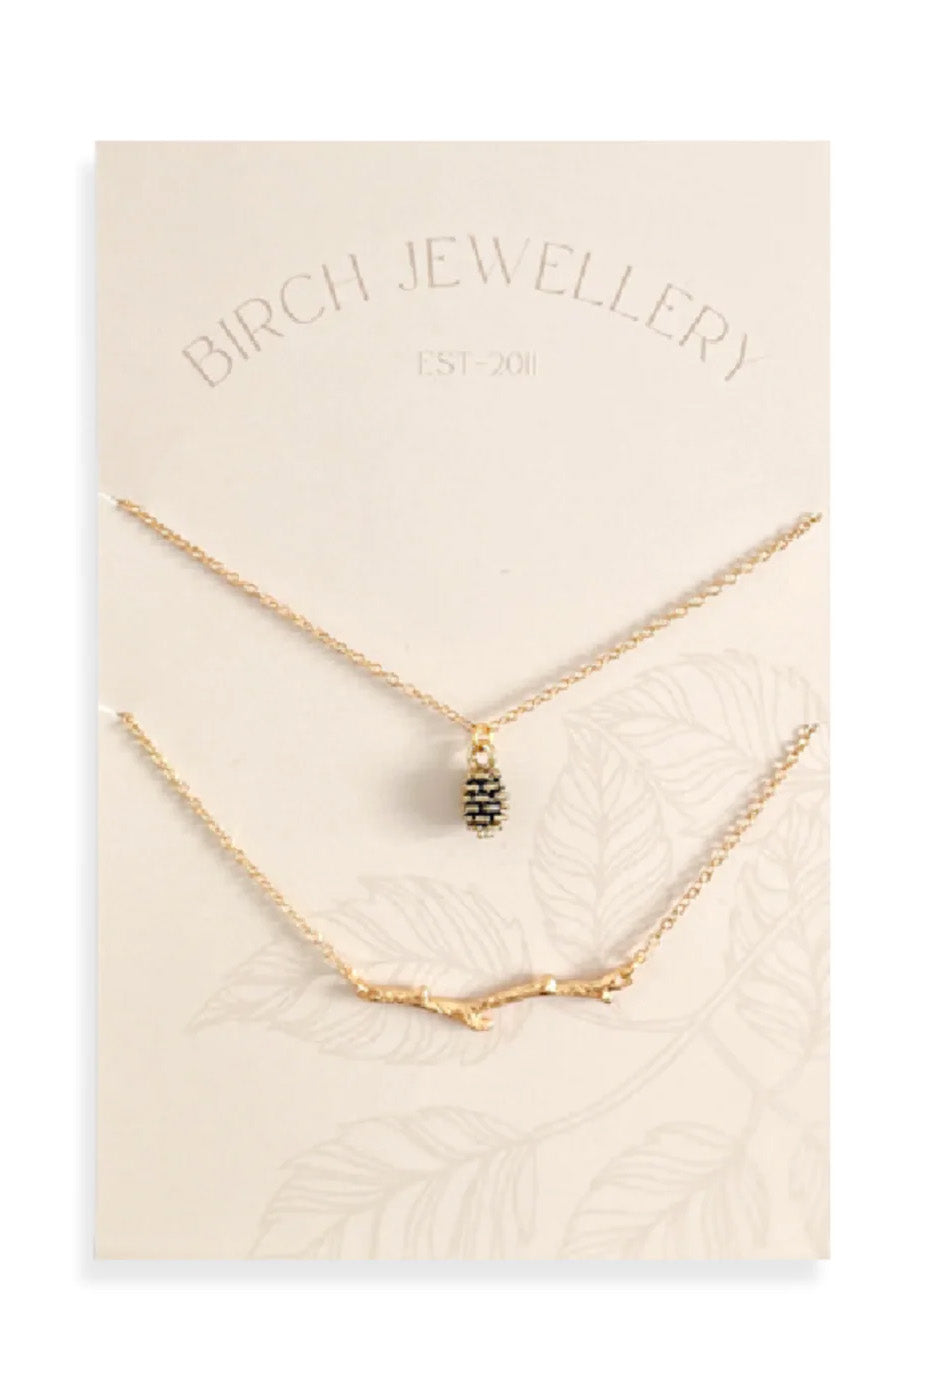 Pine Cone and Branch Layering Set by Birch Jewellery, Gold, made in Ottawa